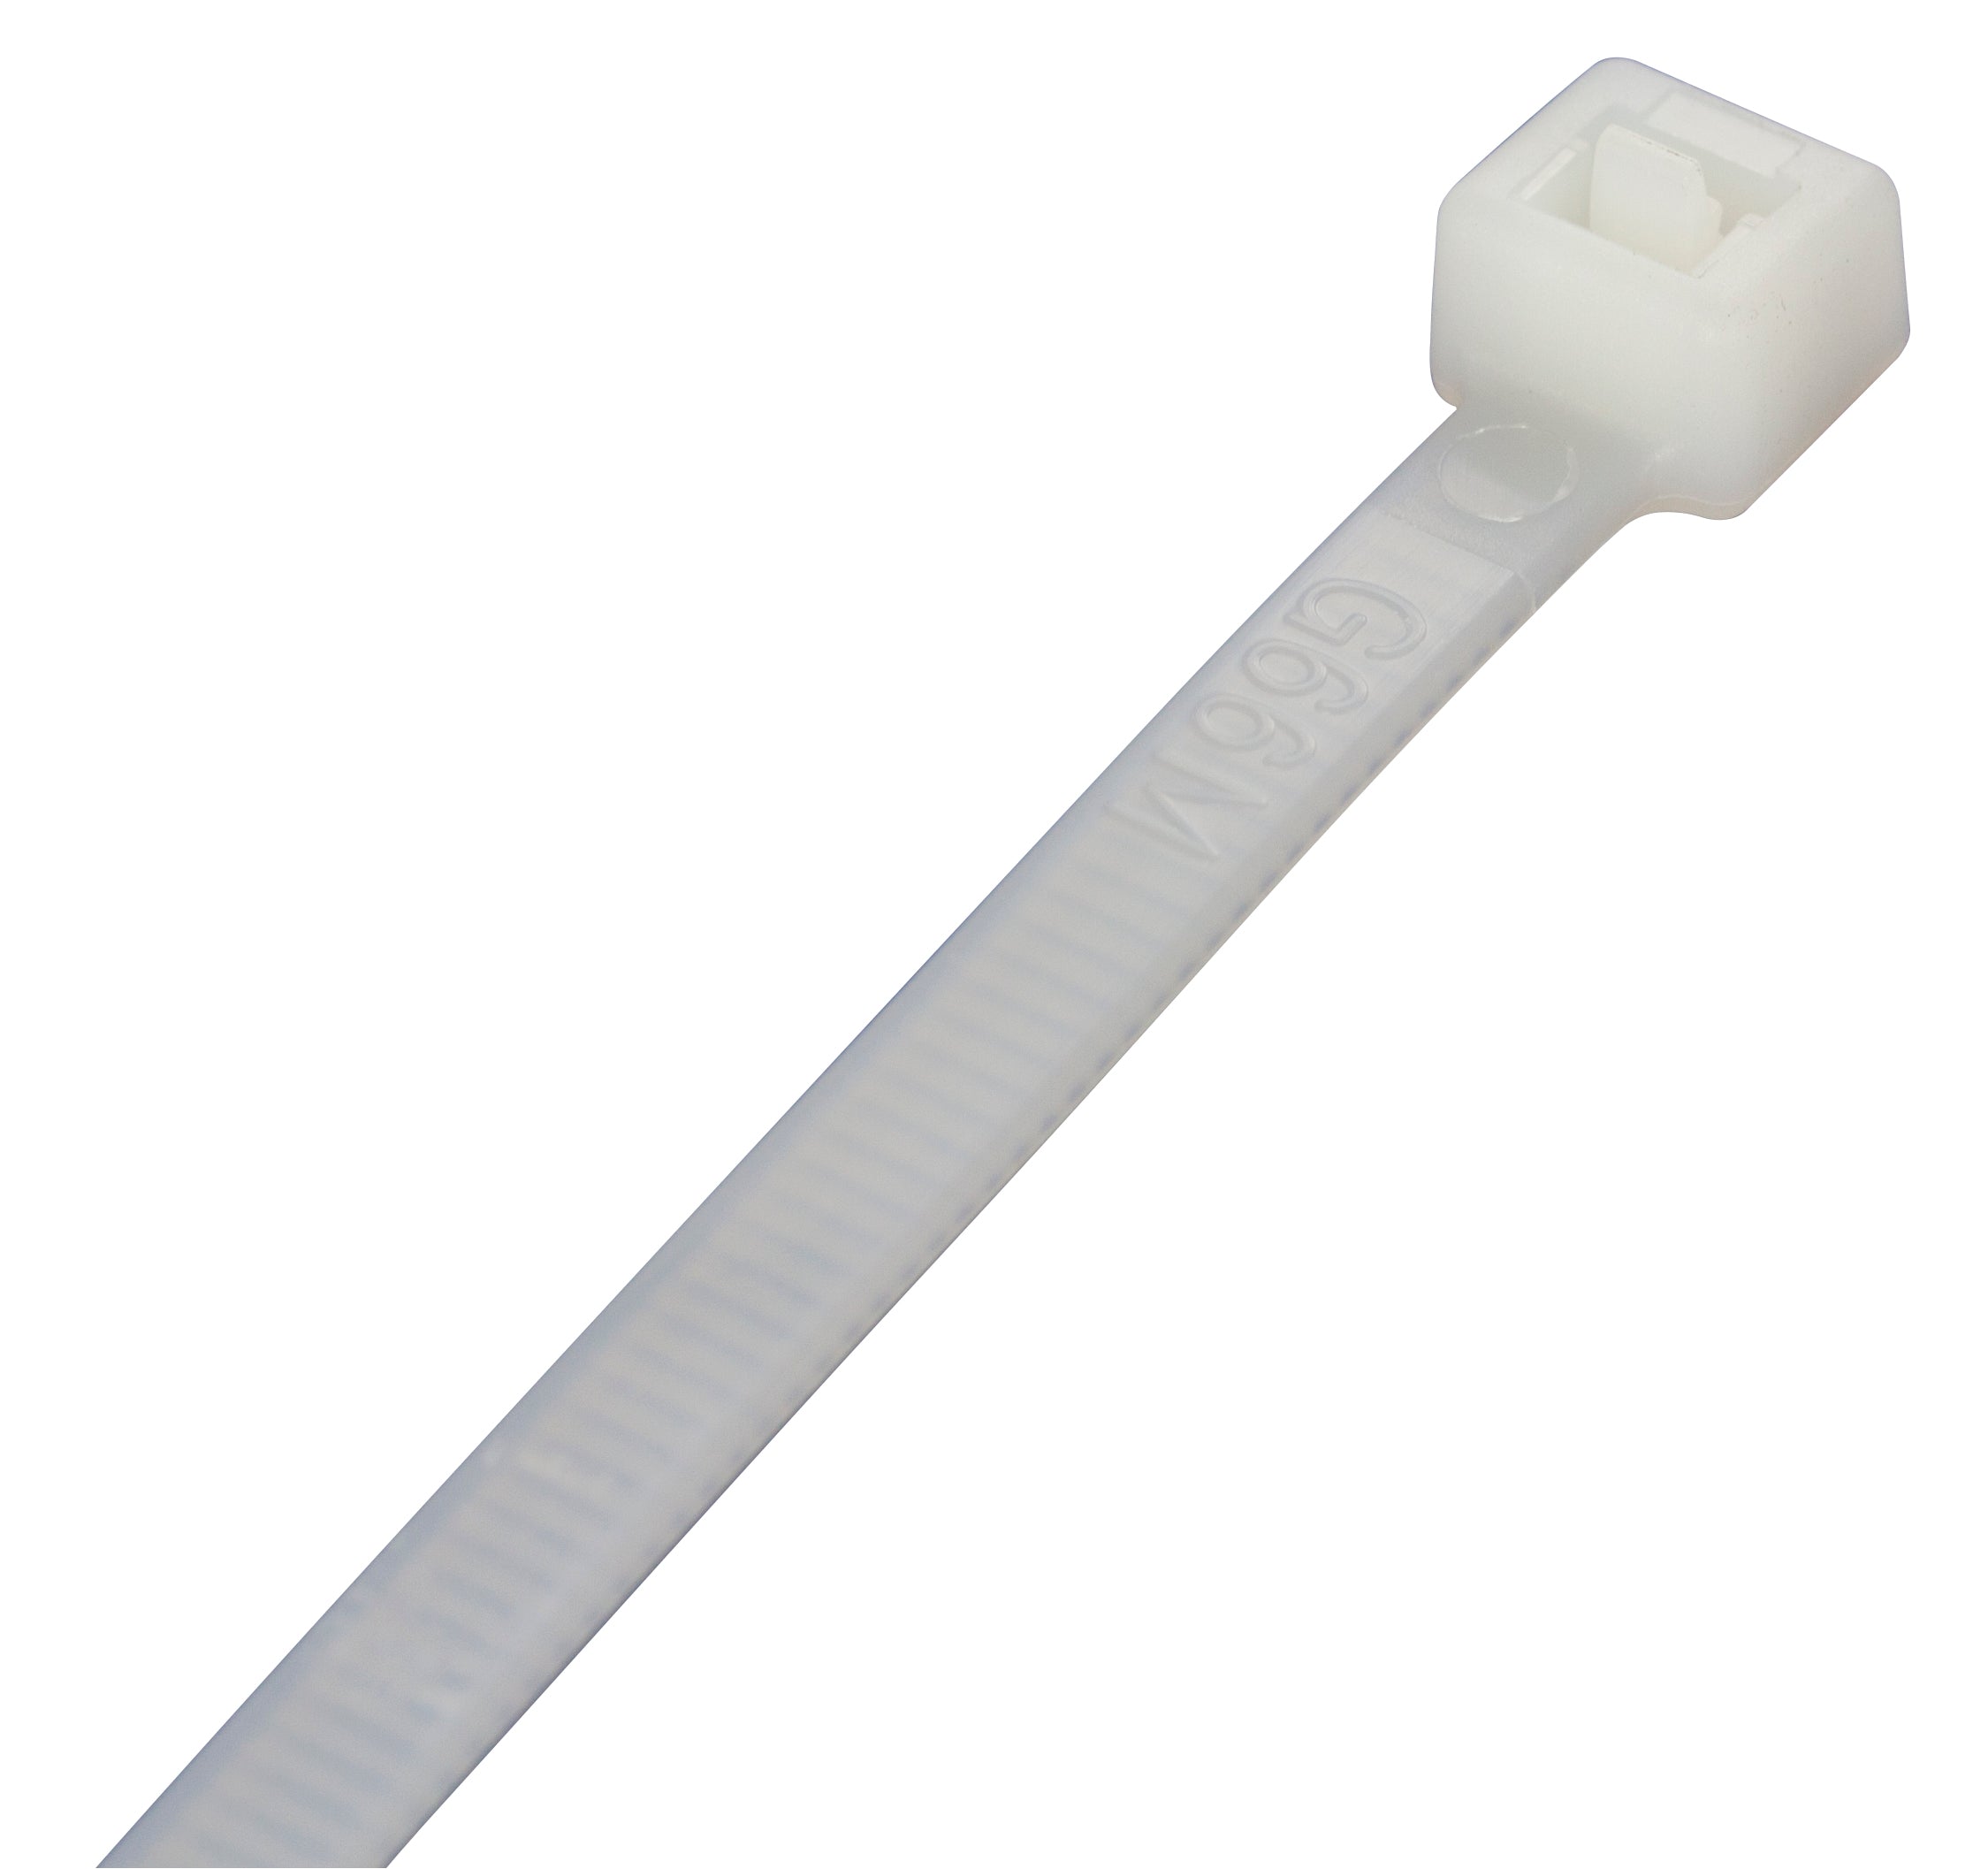 Premium Natural Cable Ties 180mm x 3.6mm - Pack of 100